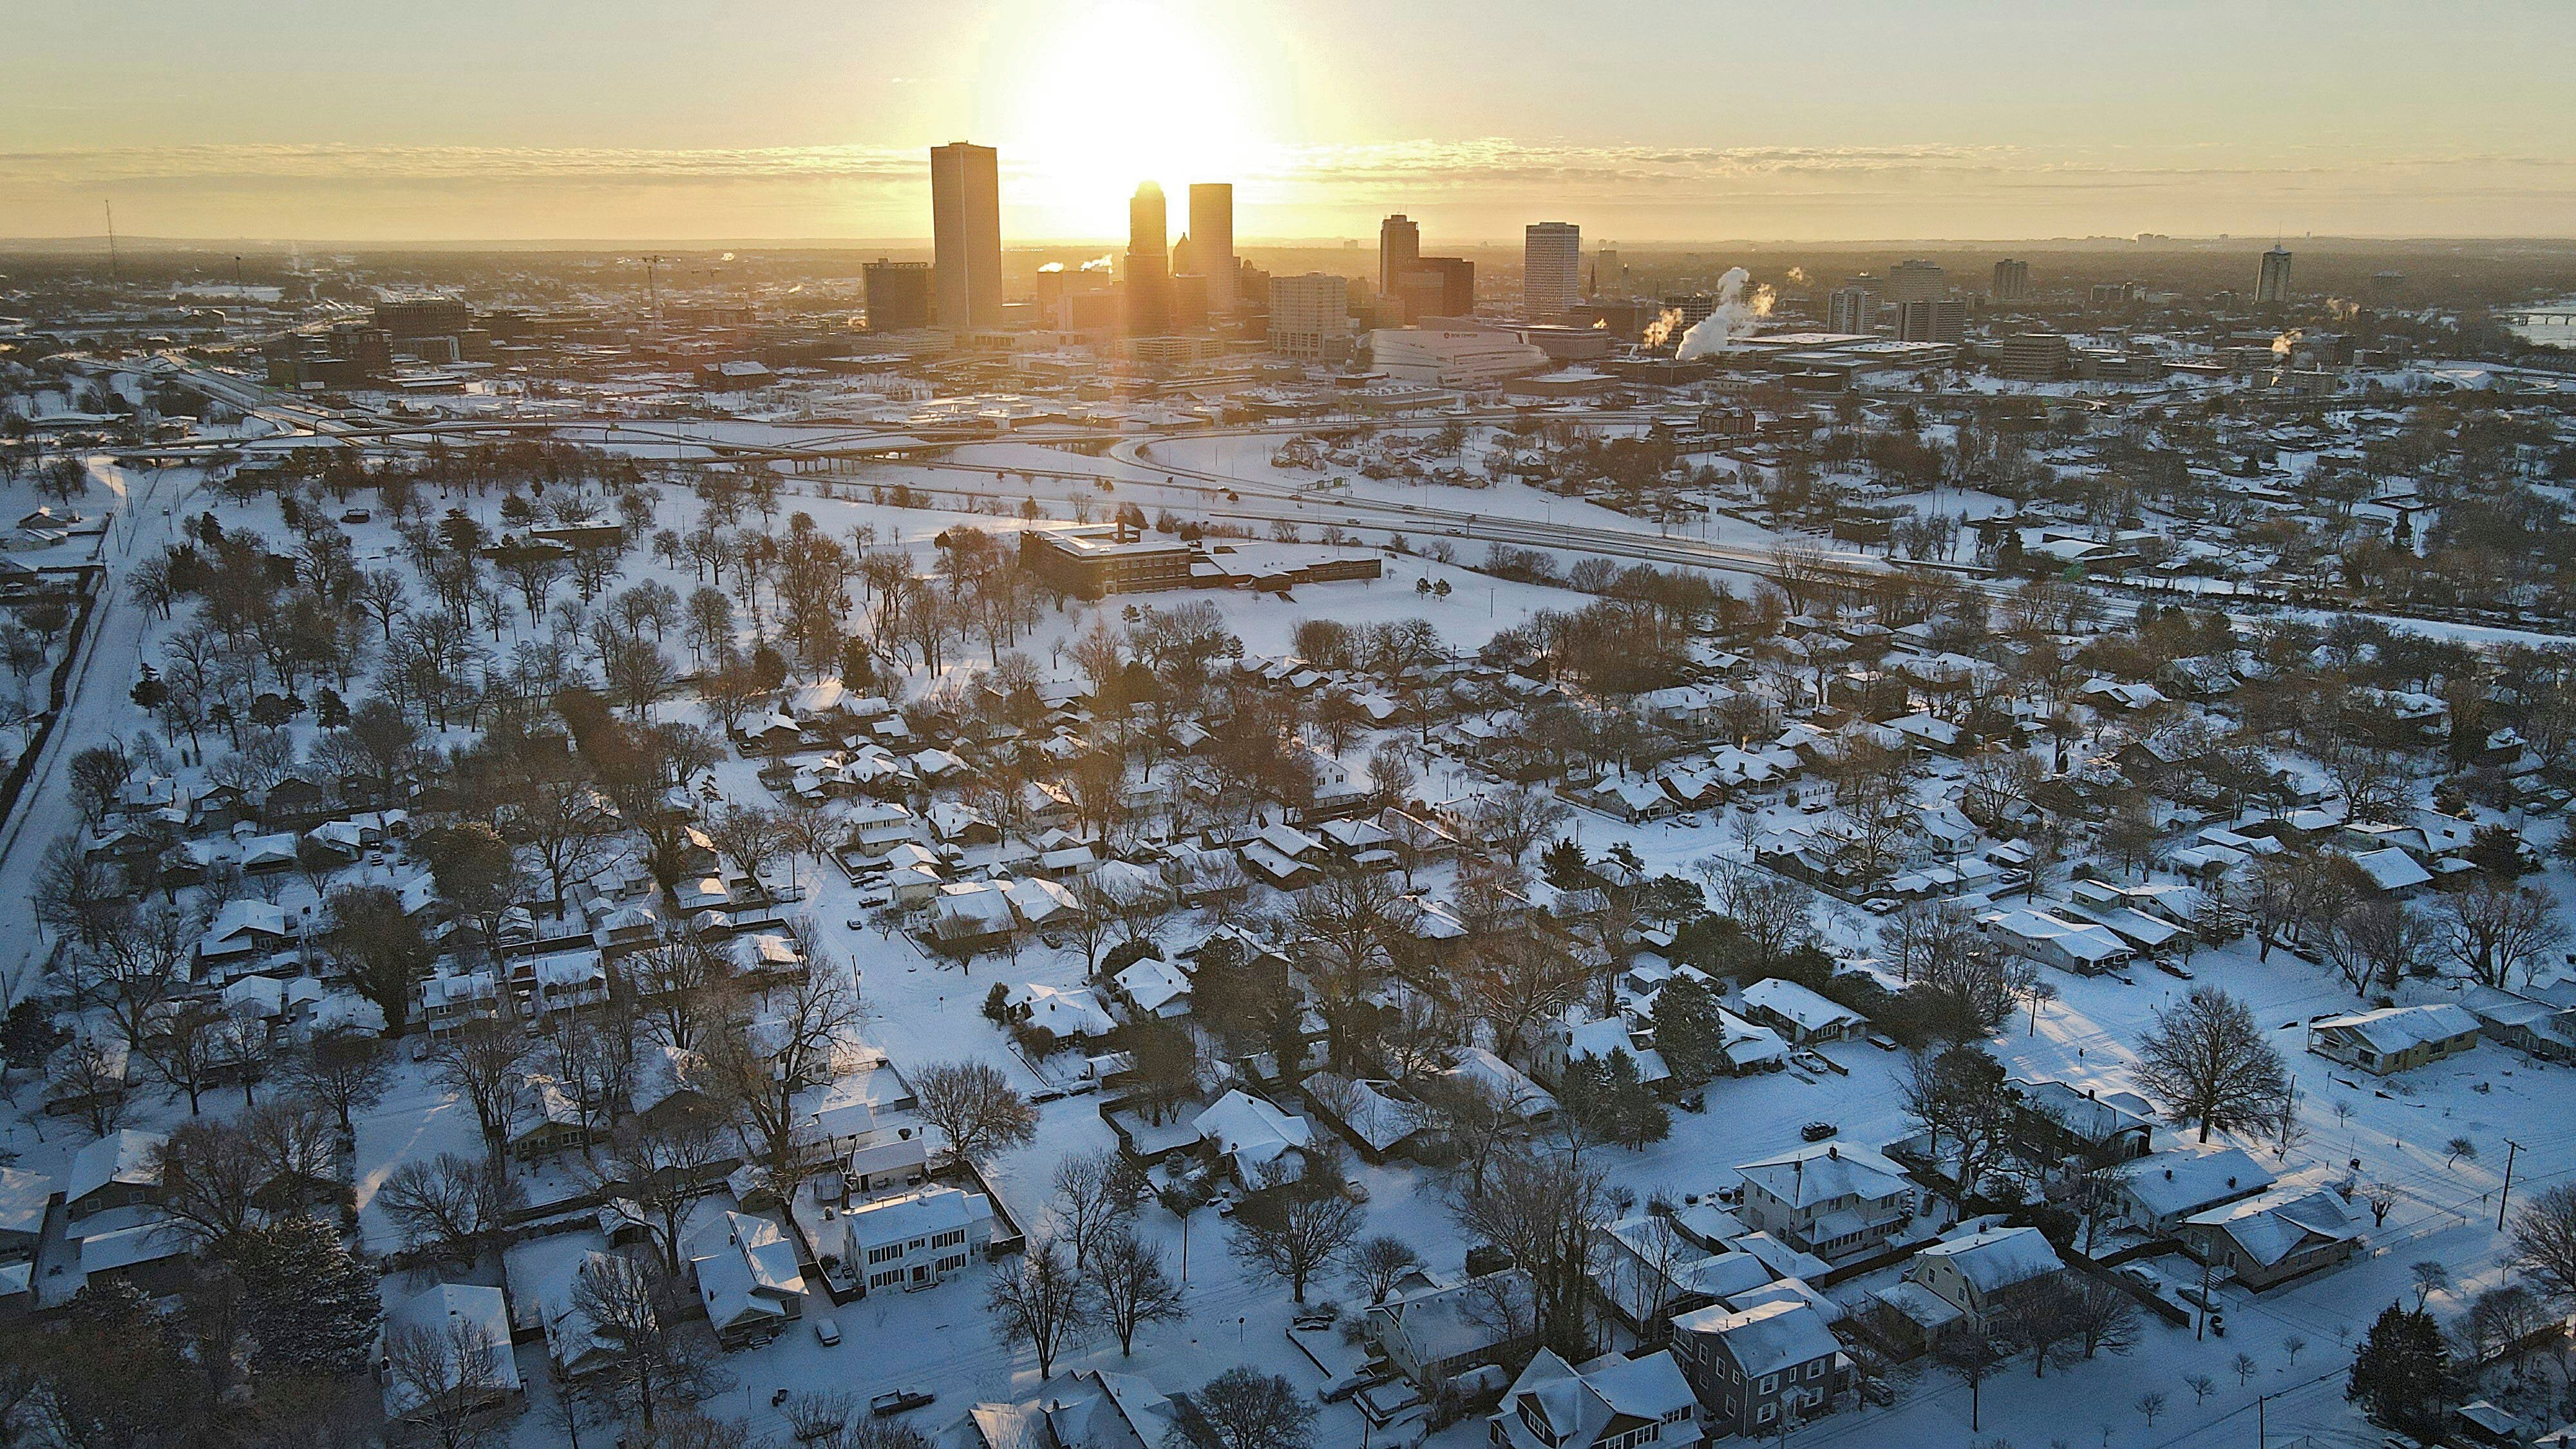 The sun rises over Tulsa, Oklahoma, after a major winter storm cut electric power to about 350,000 homes and businesses from Texas to the Ohio Valley.